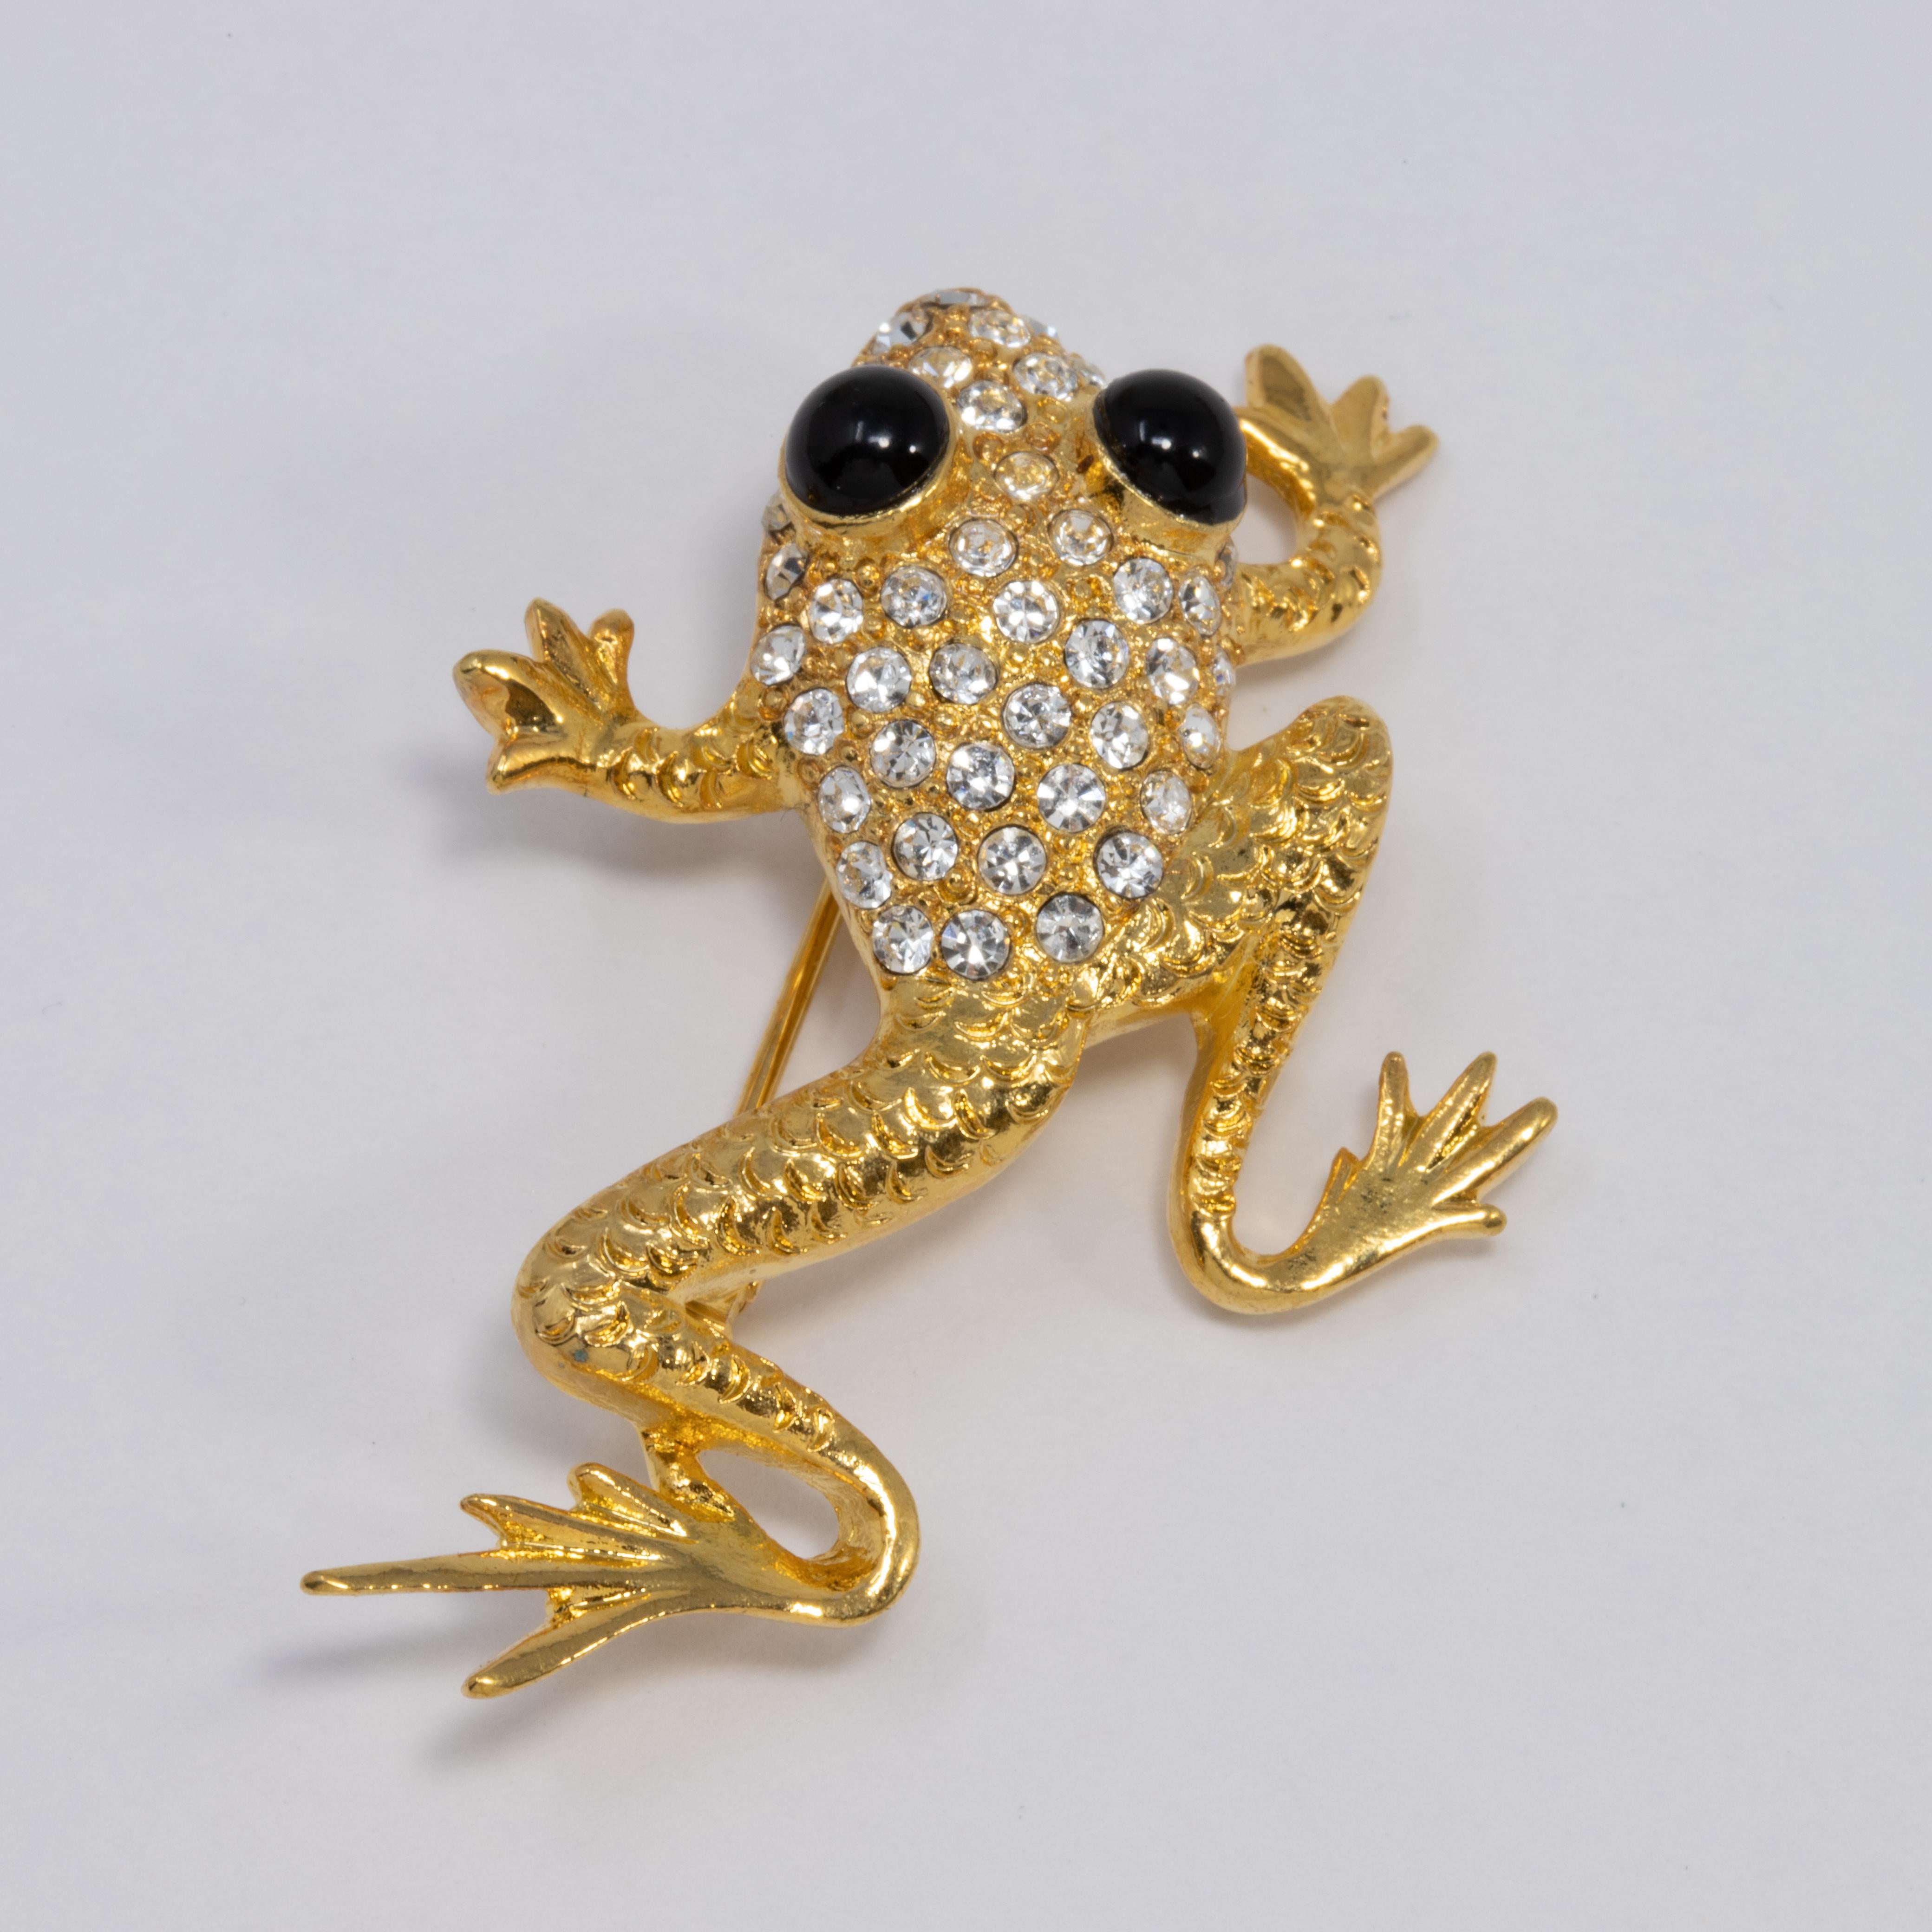 A quirky pin/brooch by Oscar de la Renta! This little gold-tone frog is decorated with pave clear crystals and two striking black cabochon eyes.

Hallmarks: Oscar de la Renta, Made in USA